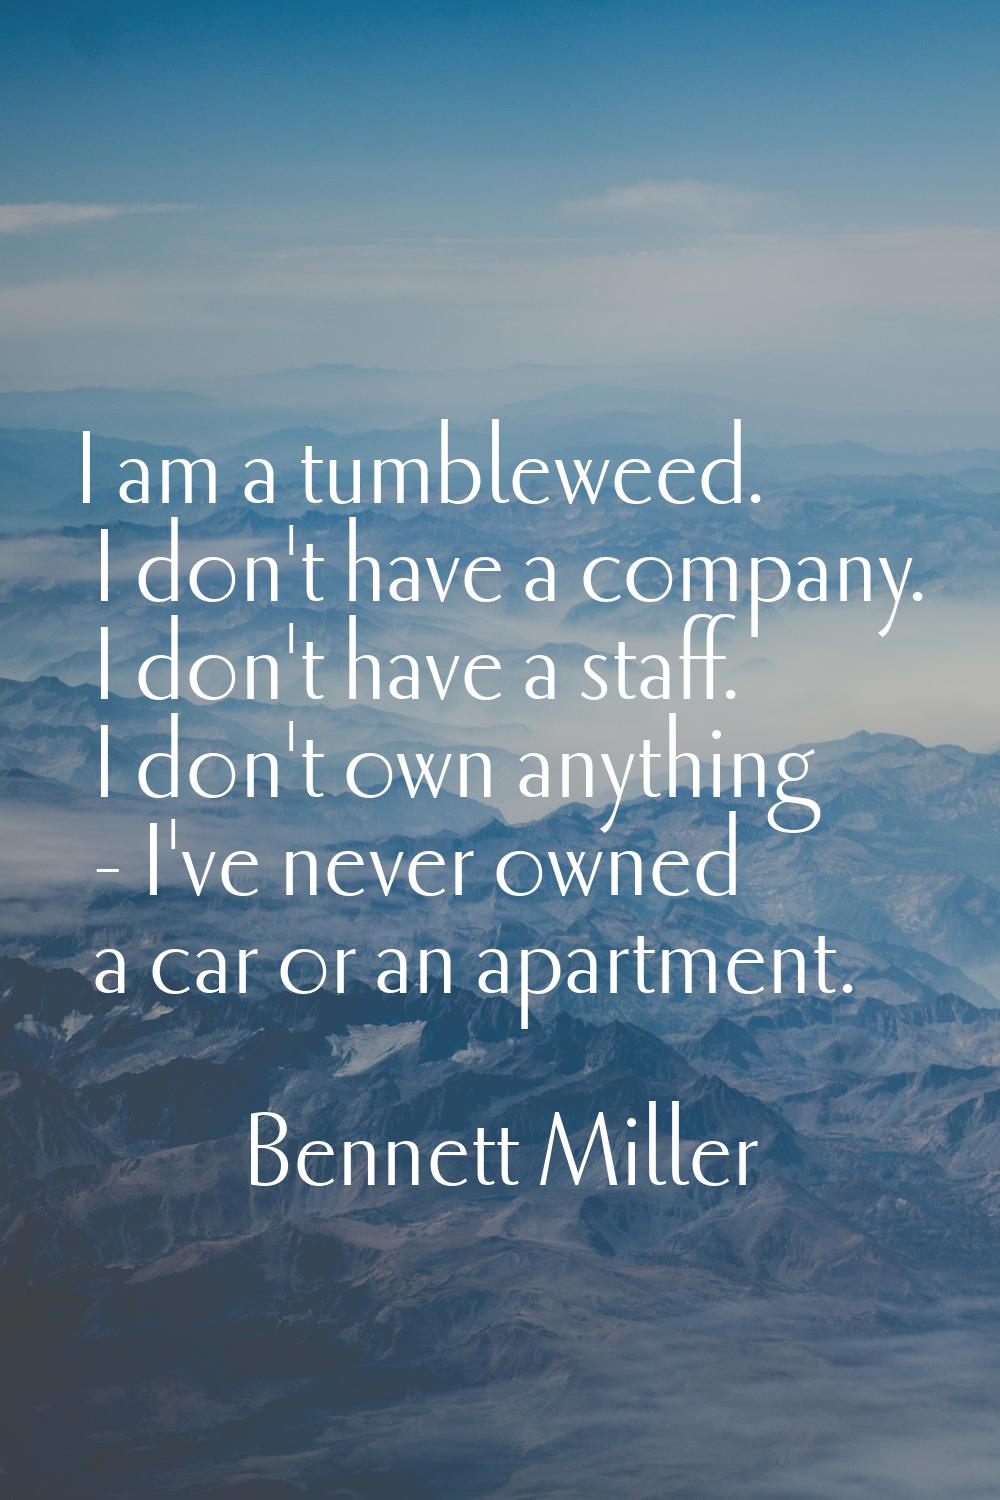 I am a tumbleweed. I don't have a company. I don't have a staff. I don't own anything - I've never 